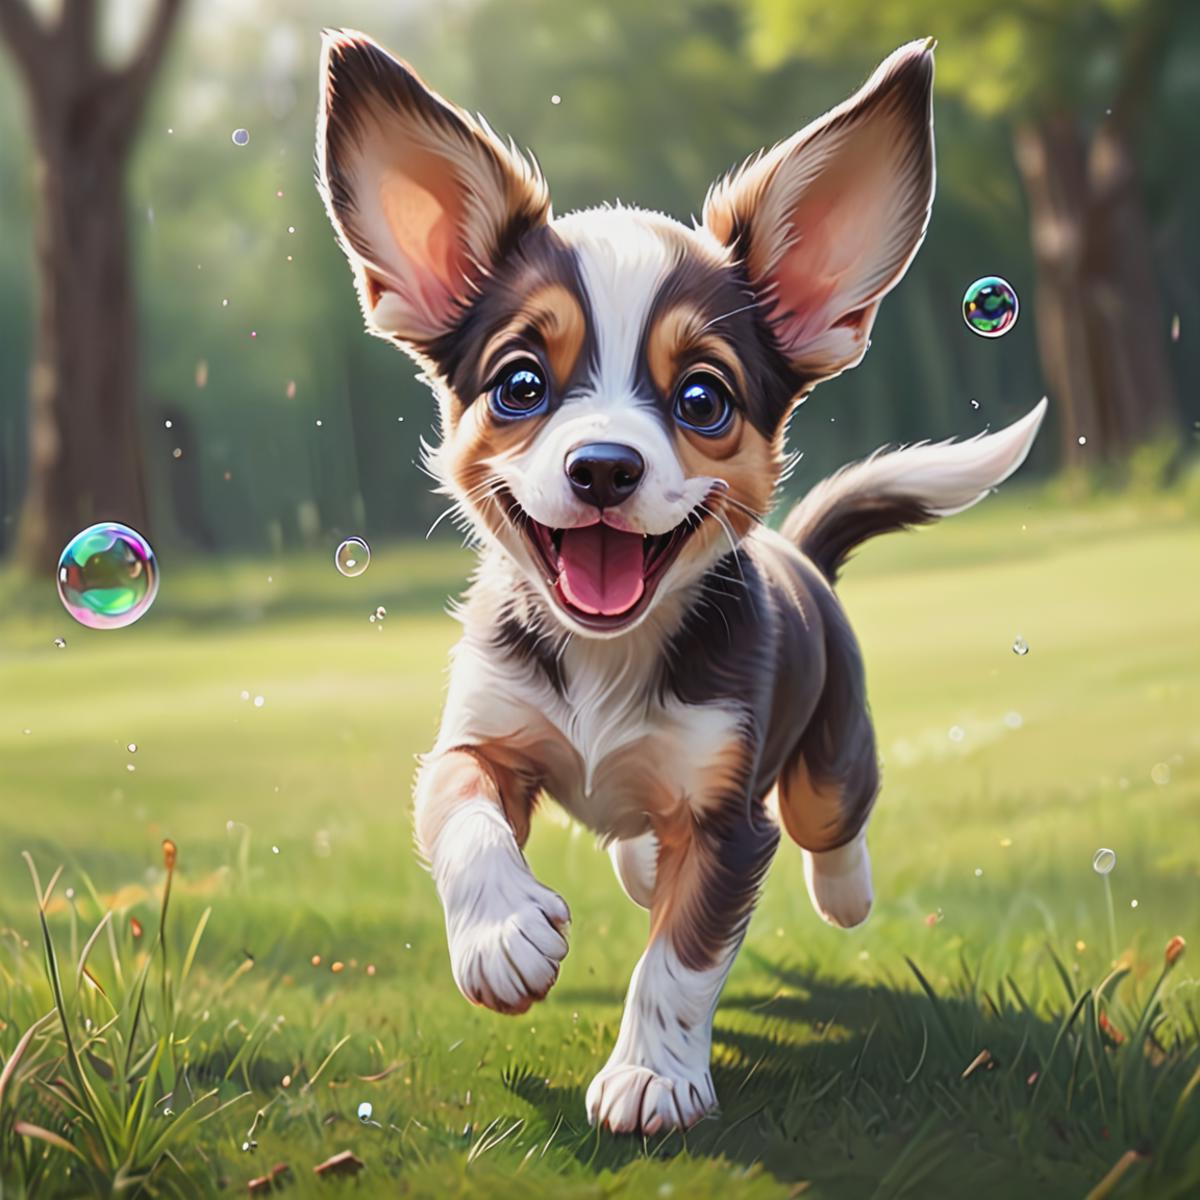 Adorable Corgi Dog Running in Field with Bubbles and Smiling